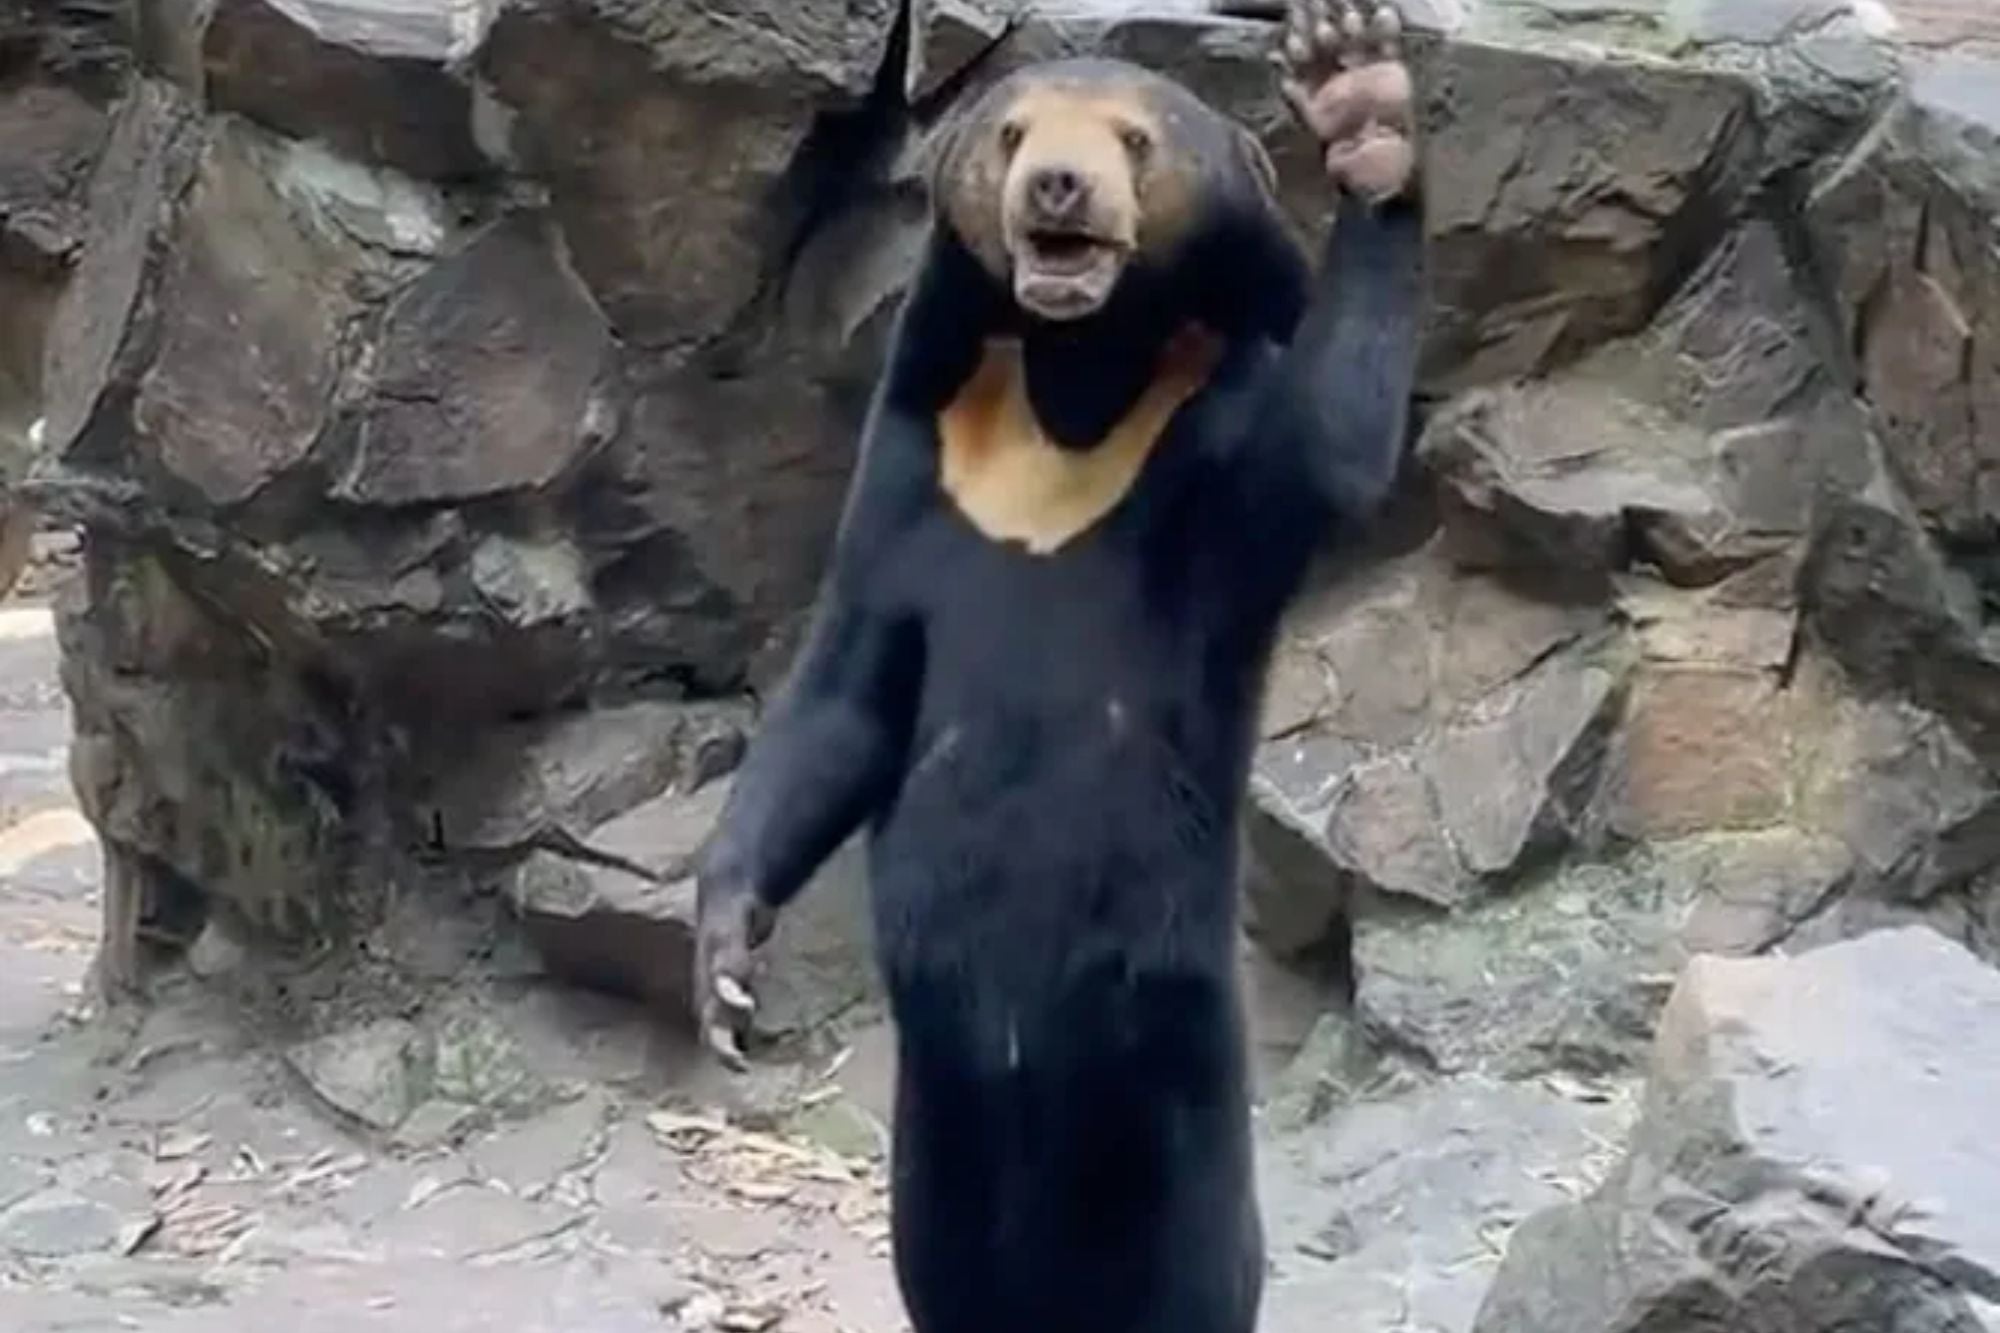 The infamous Chinese sun bear waves at visitors